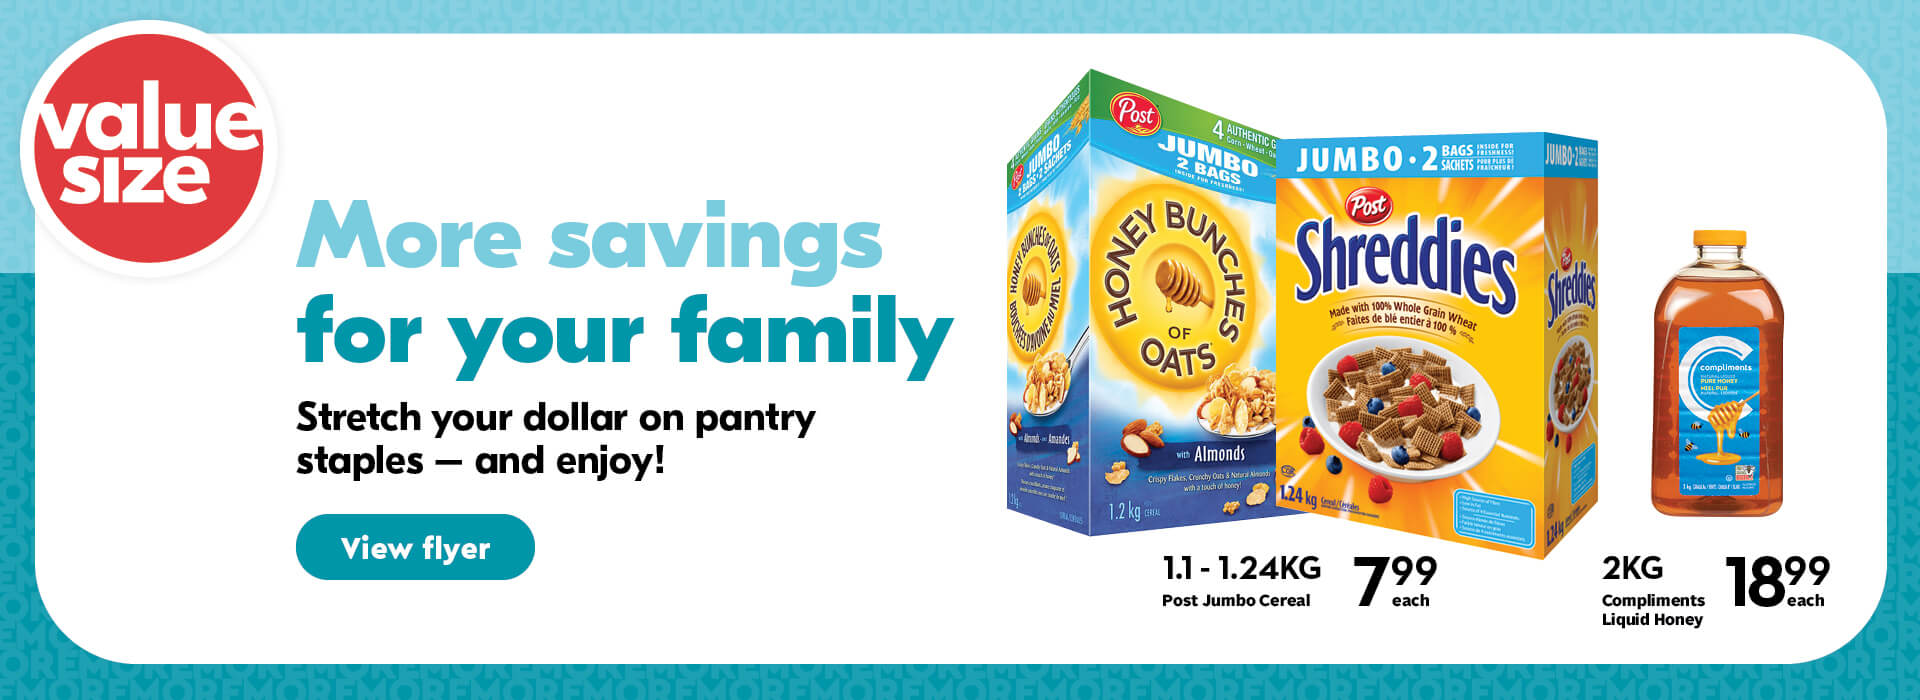 Text Reading 'More savings for your family. Stretch your dollar on pantry staples and enjoy two jumbo bags of Honey bunches of Oats and Shreddies costing $7.99 each and more' with a 'View flyer' button below.